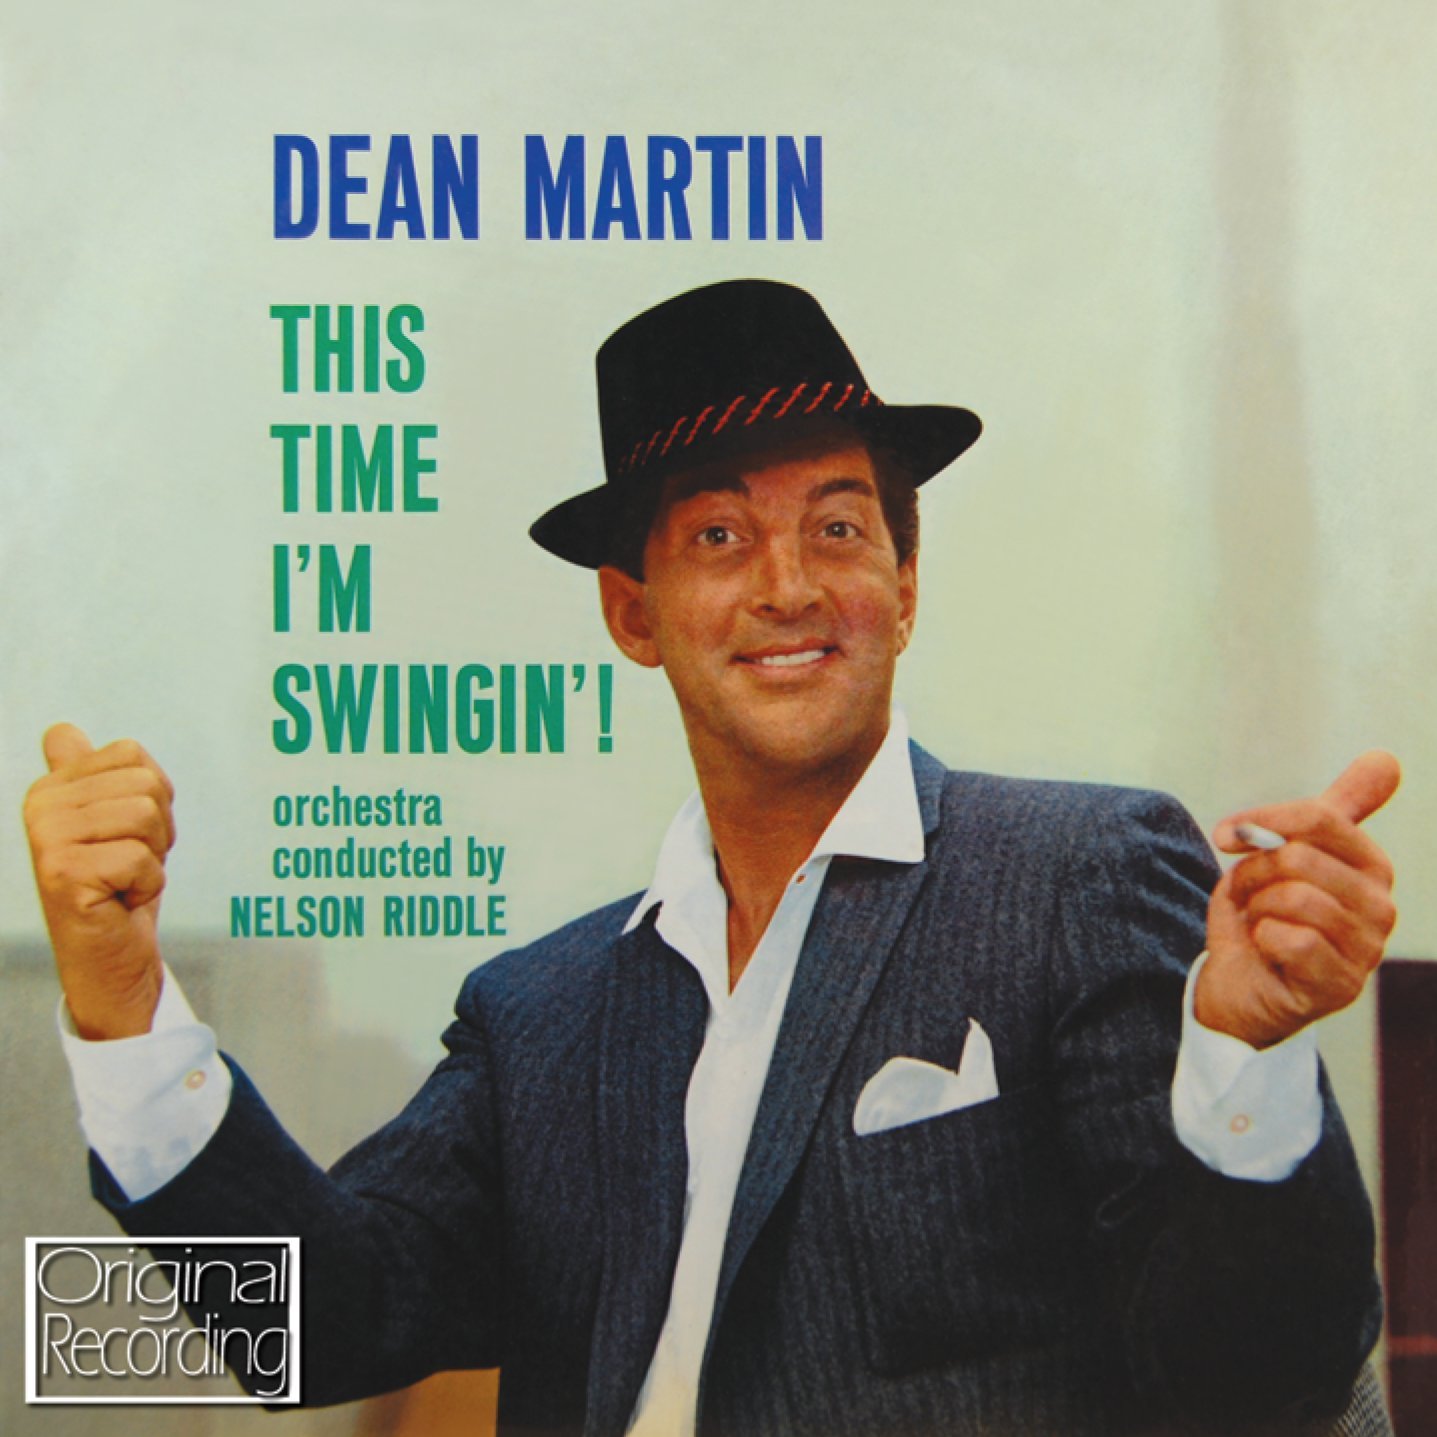 A Toast to Dean Martin: The Charm and Voice of a Legend